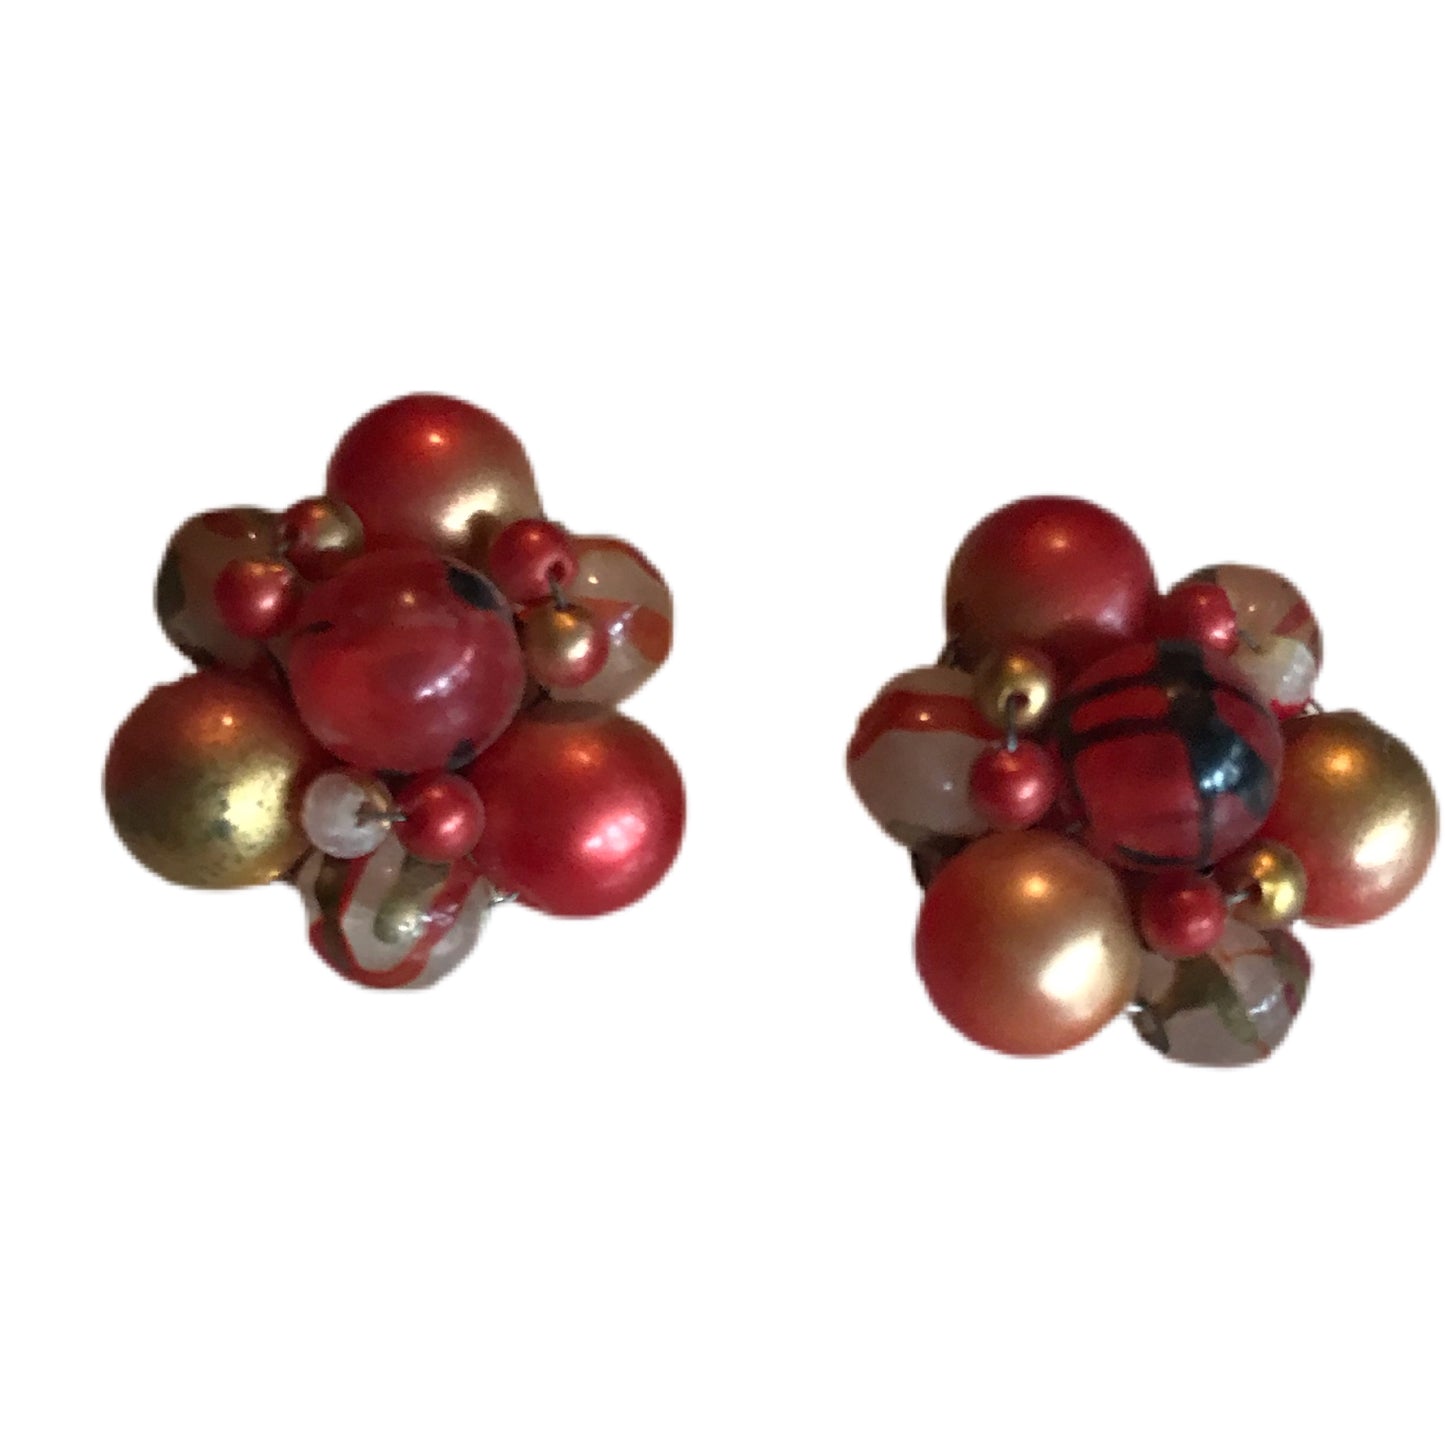 Red Plastic Bead Cluster Clip Earrings circa 1960s